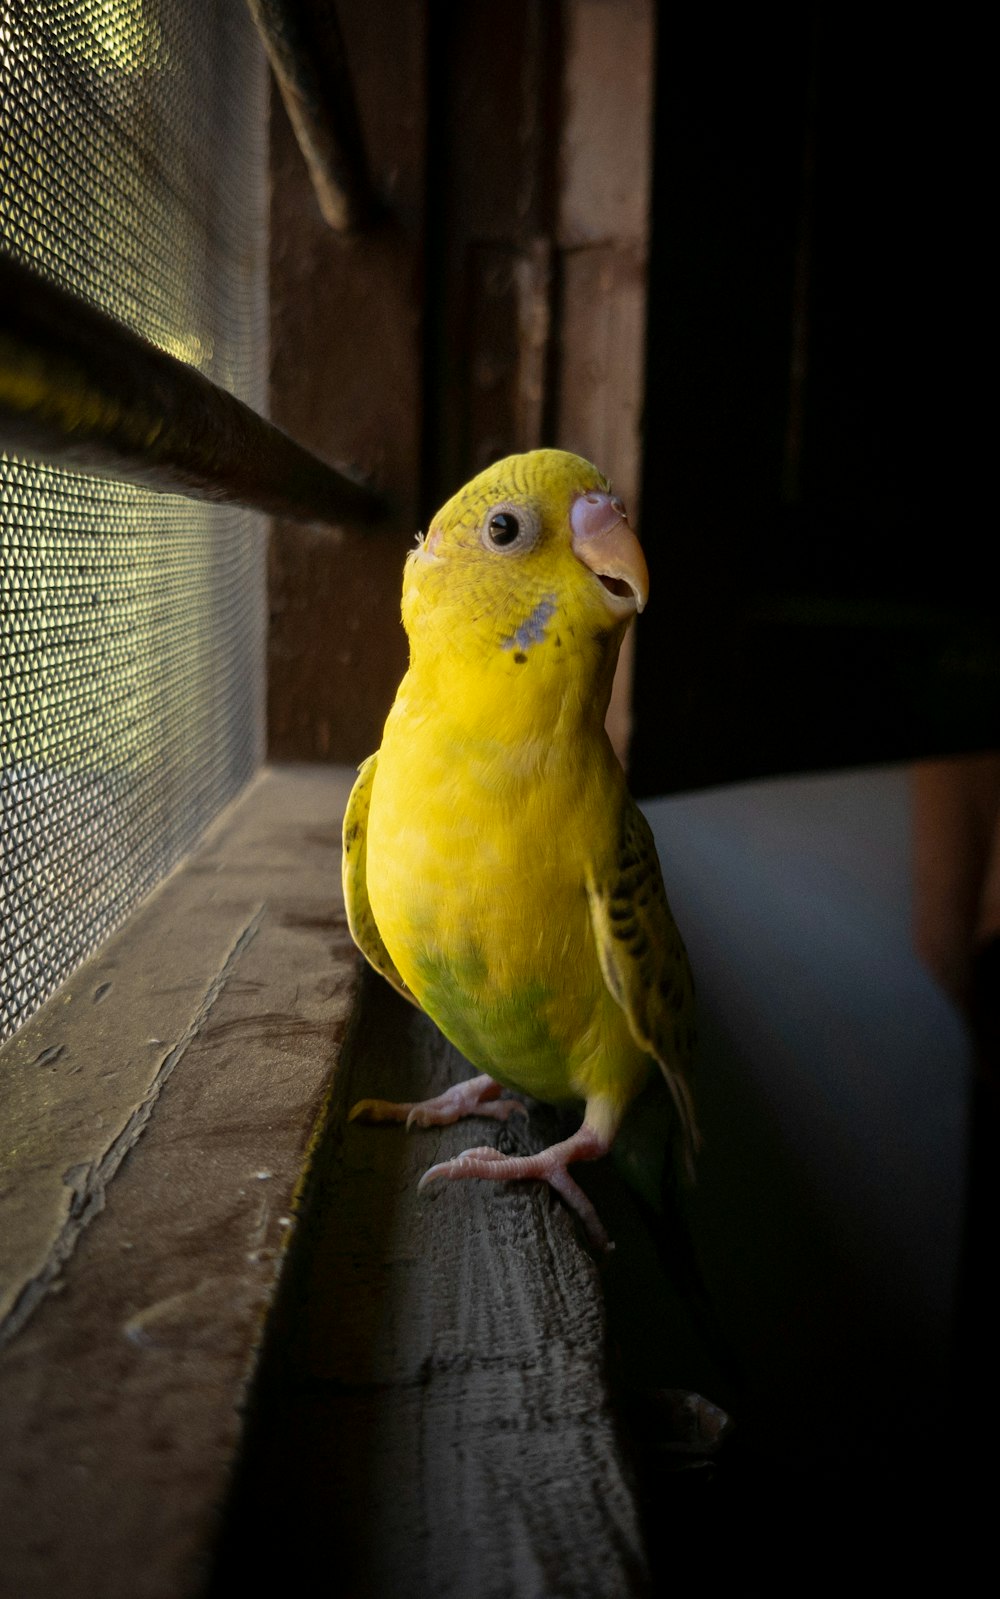 a yellow bird is sitting on a ledge